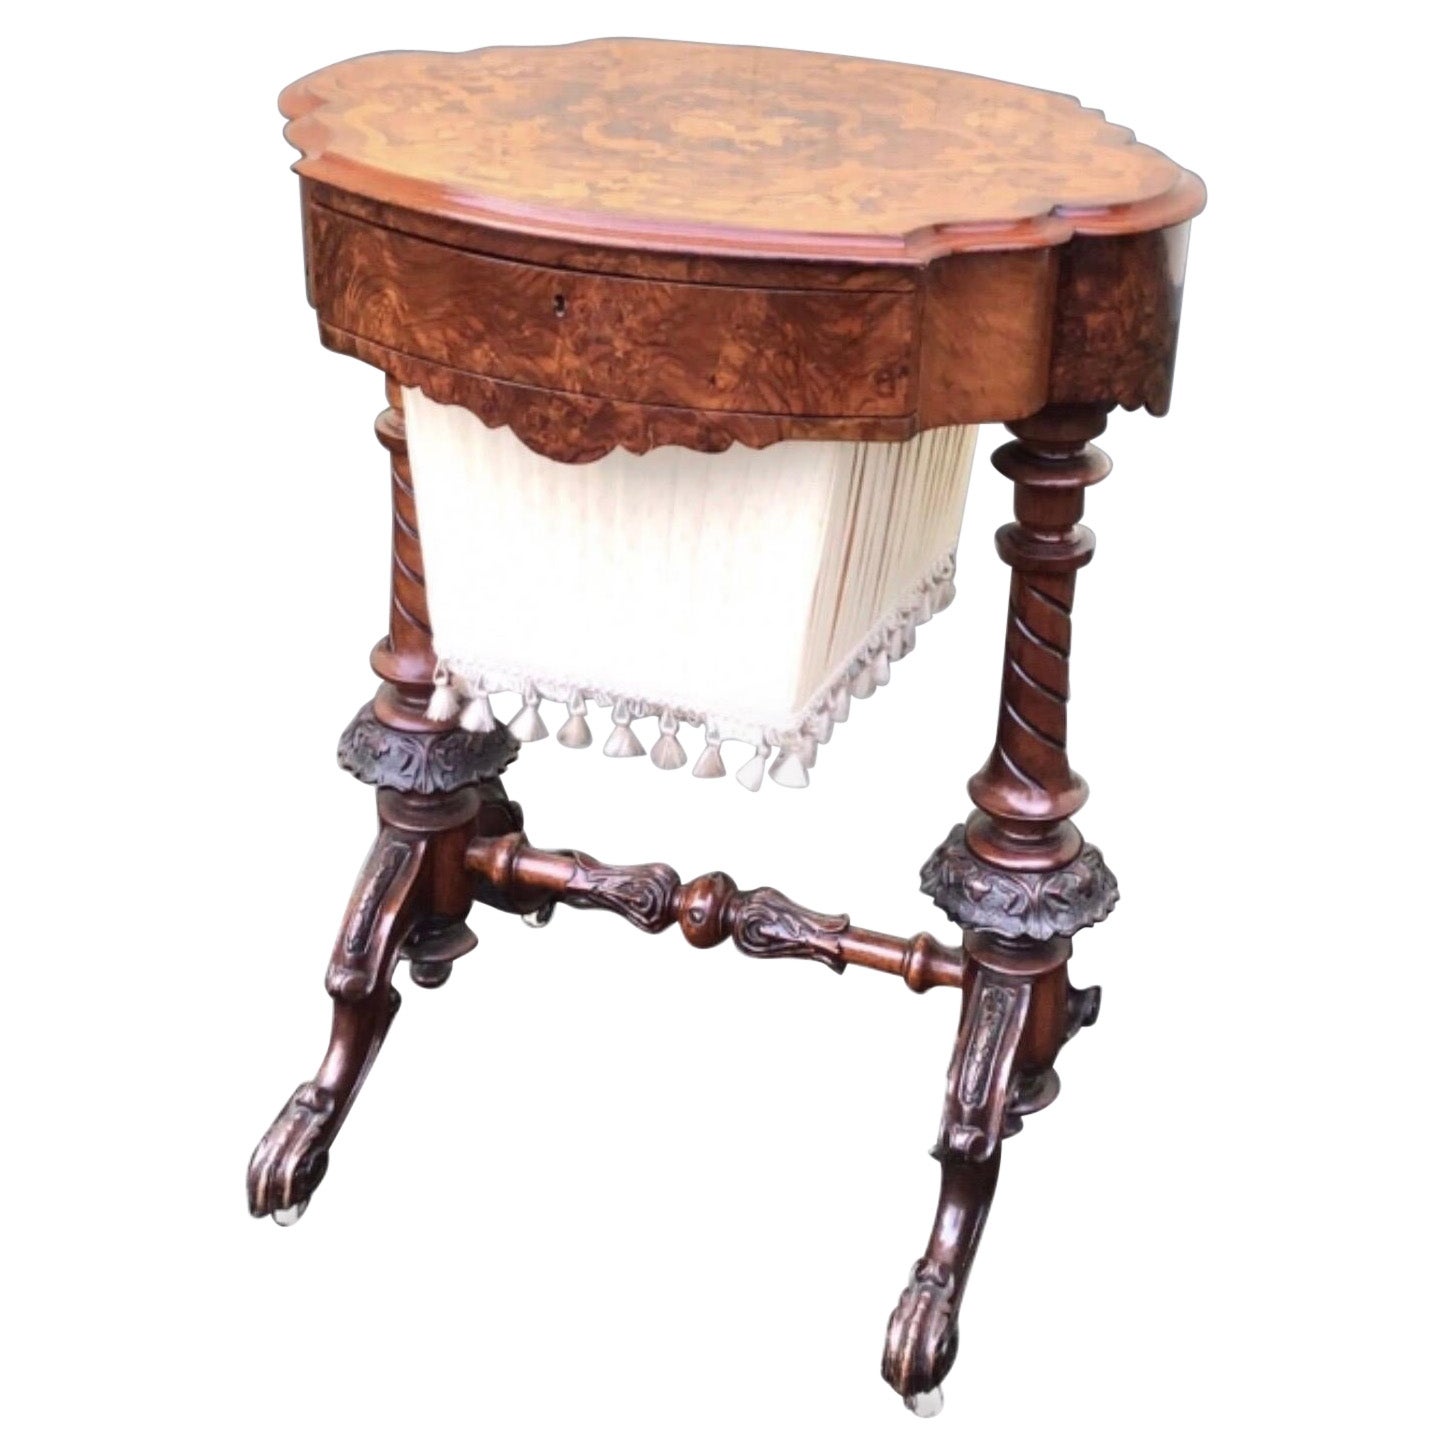 Antique Burr Walnut Oval Sewing Work Lamp Table